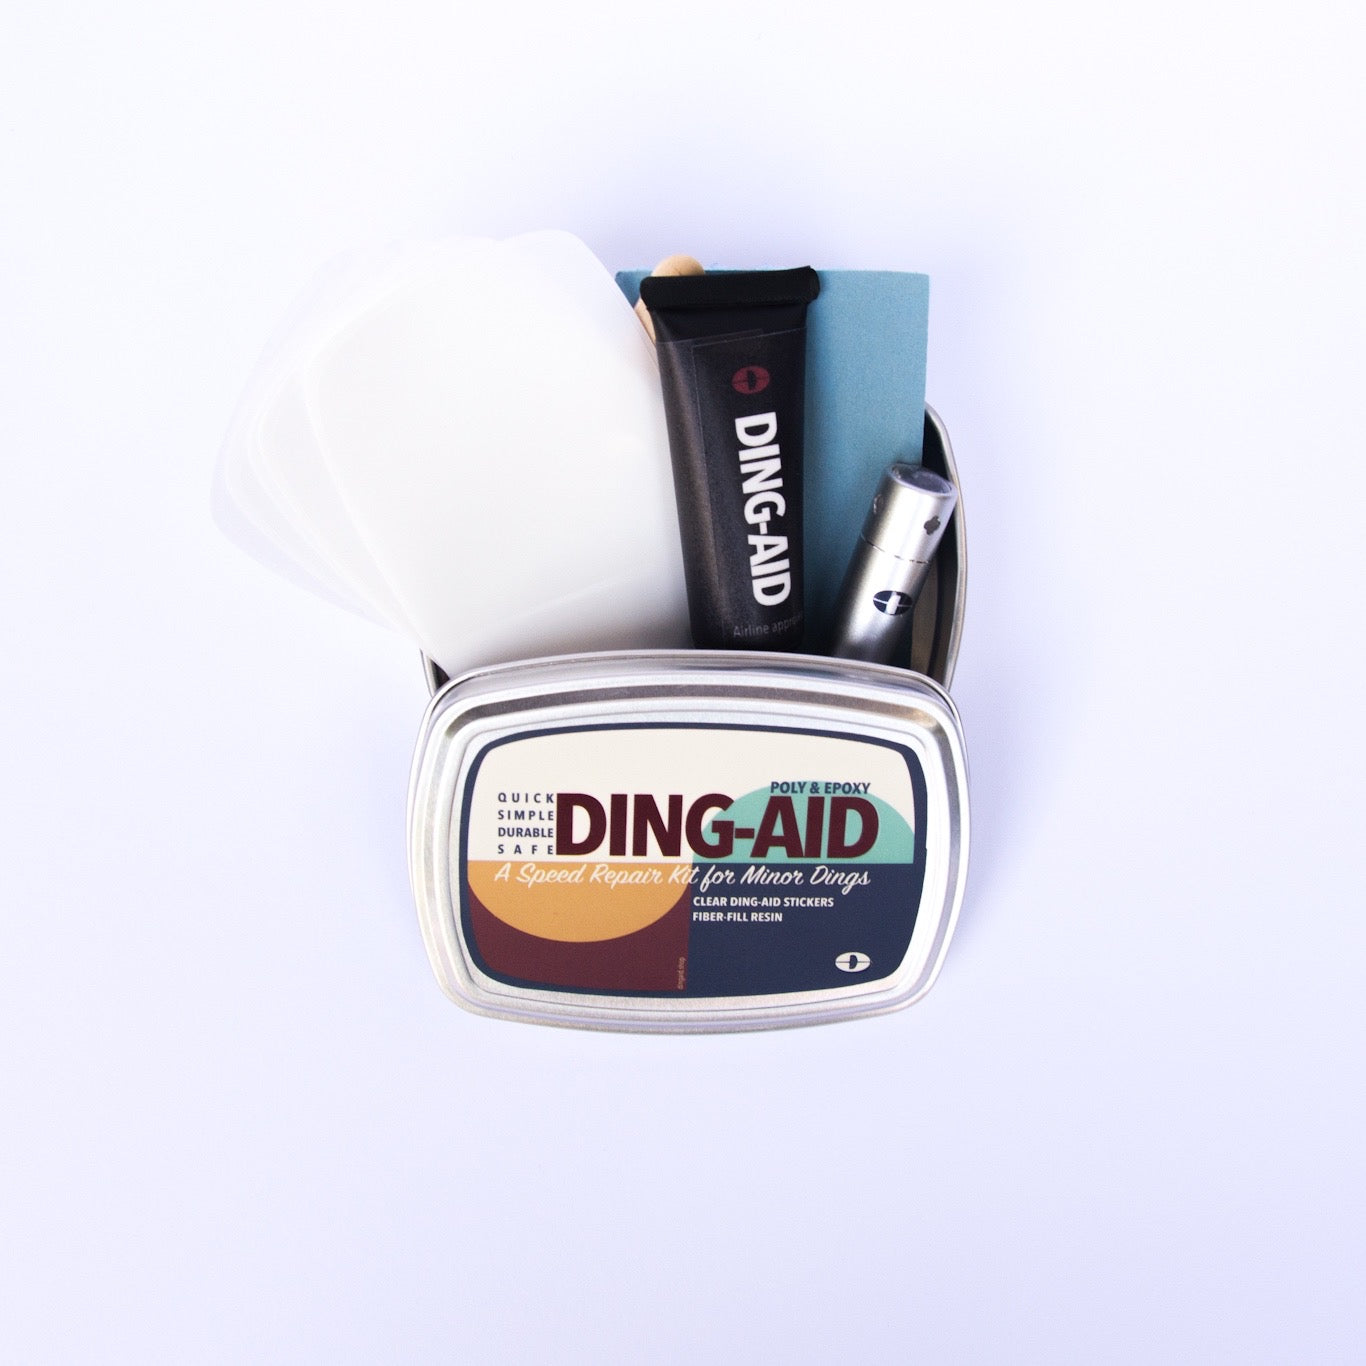 DING-AID